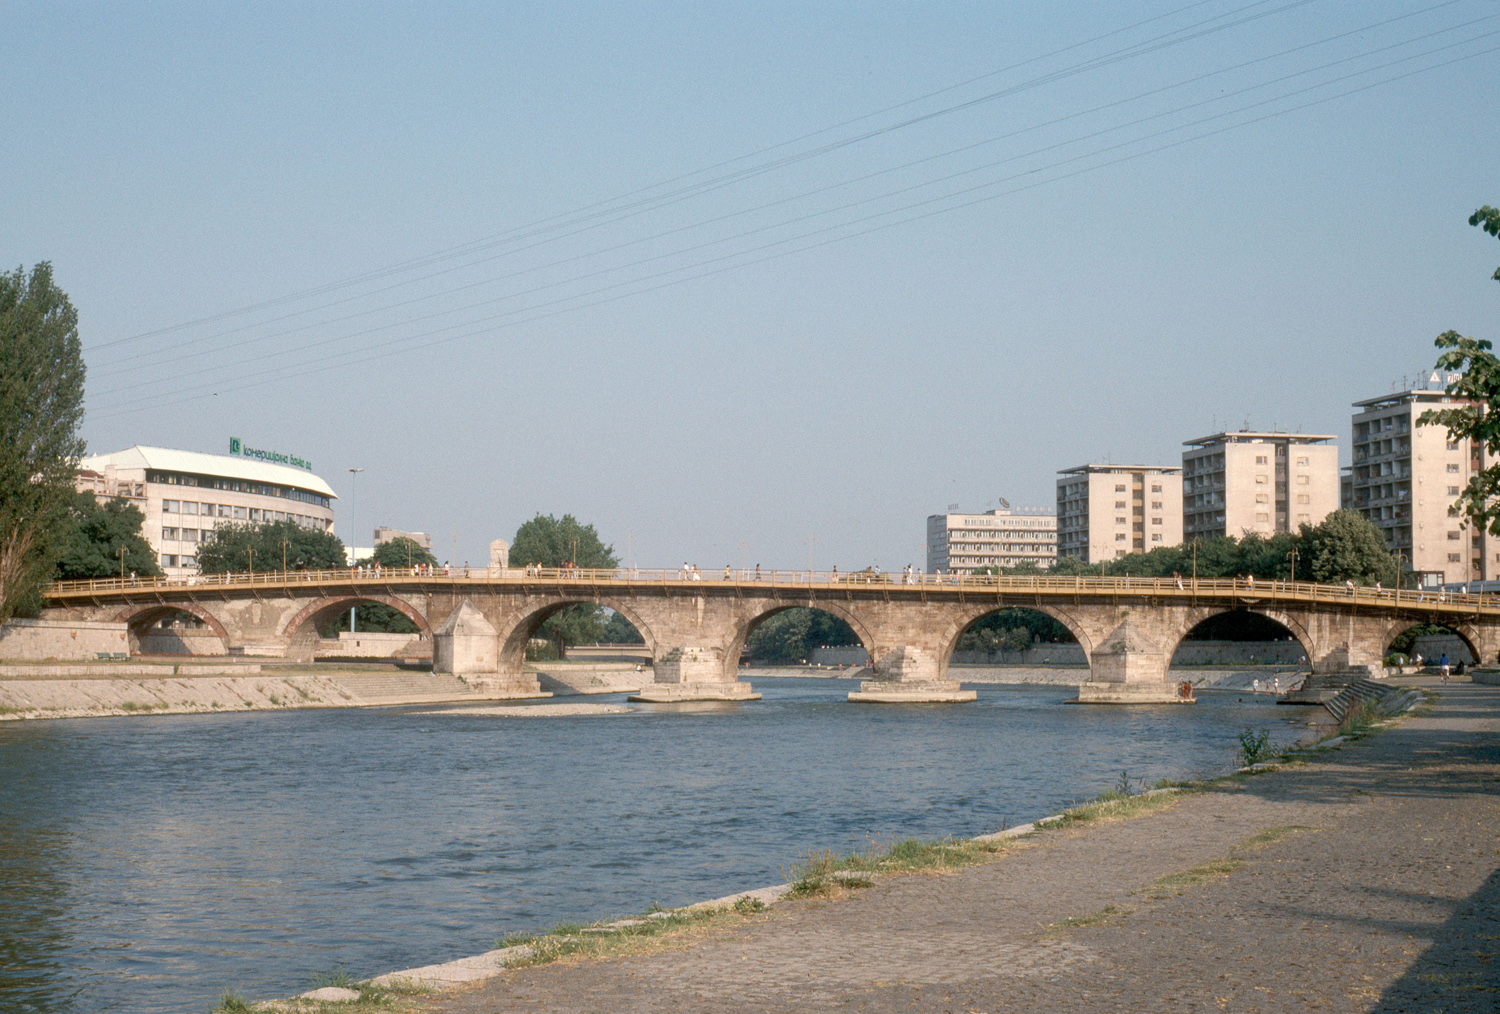 General view of the full bridge span looking west from the northern bank of the Vardar River